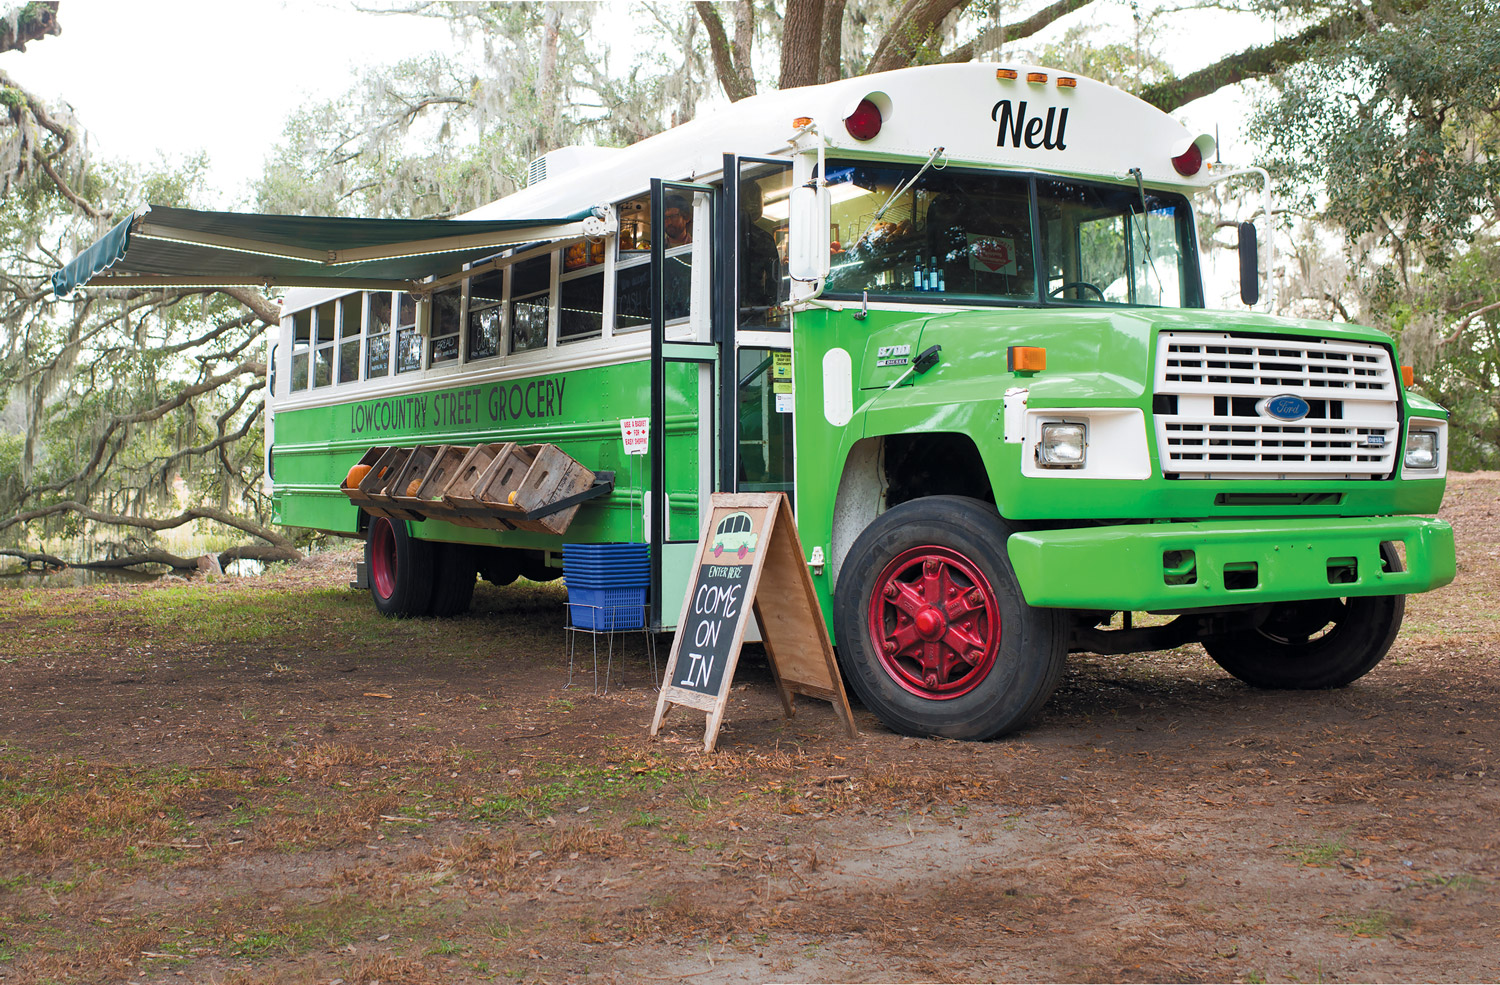 lowcountry street grocery bus